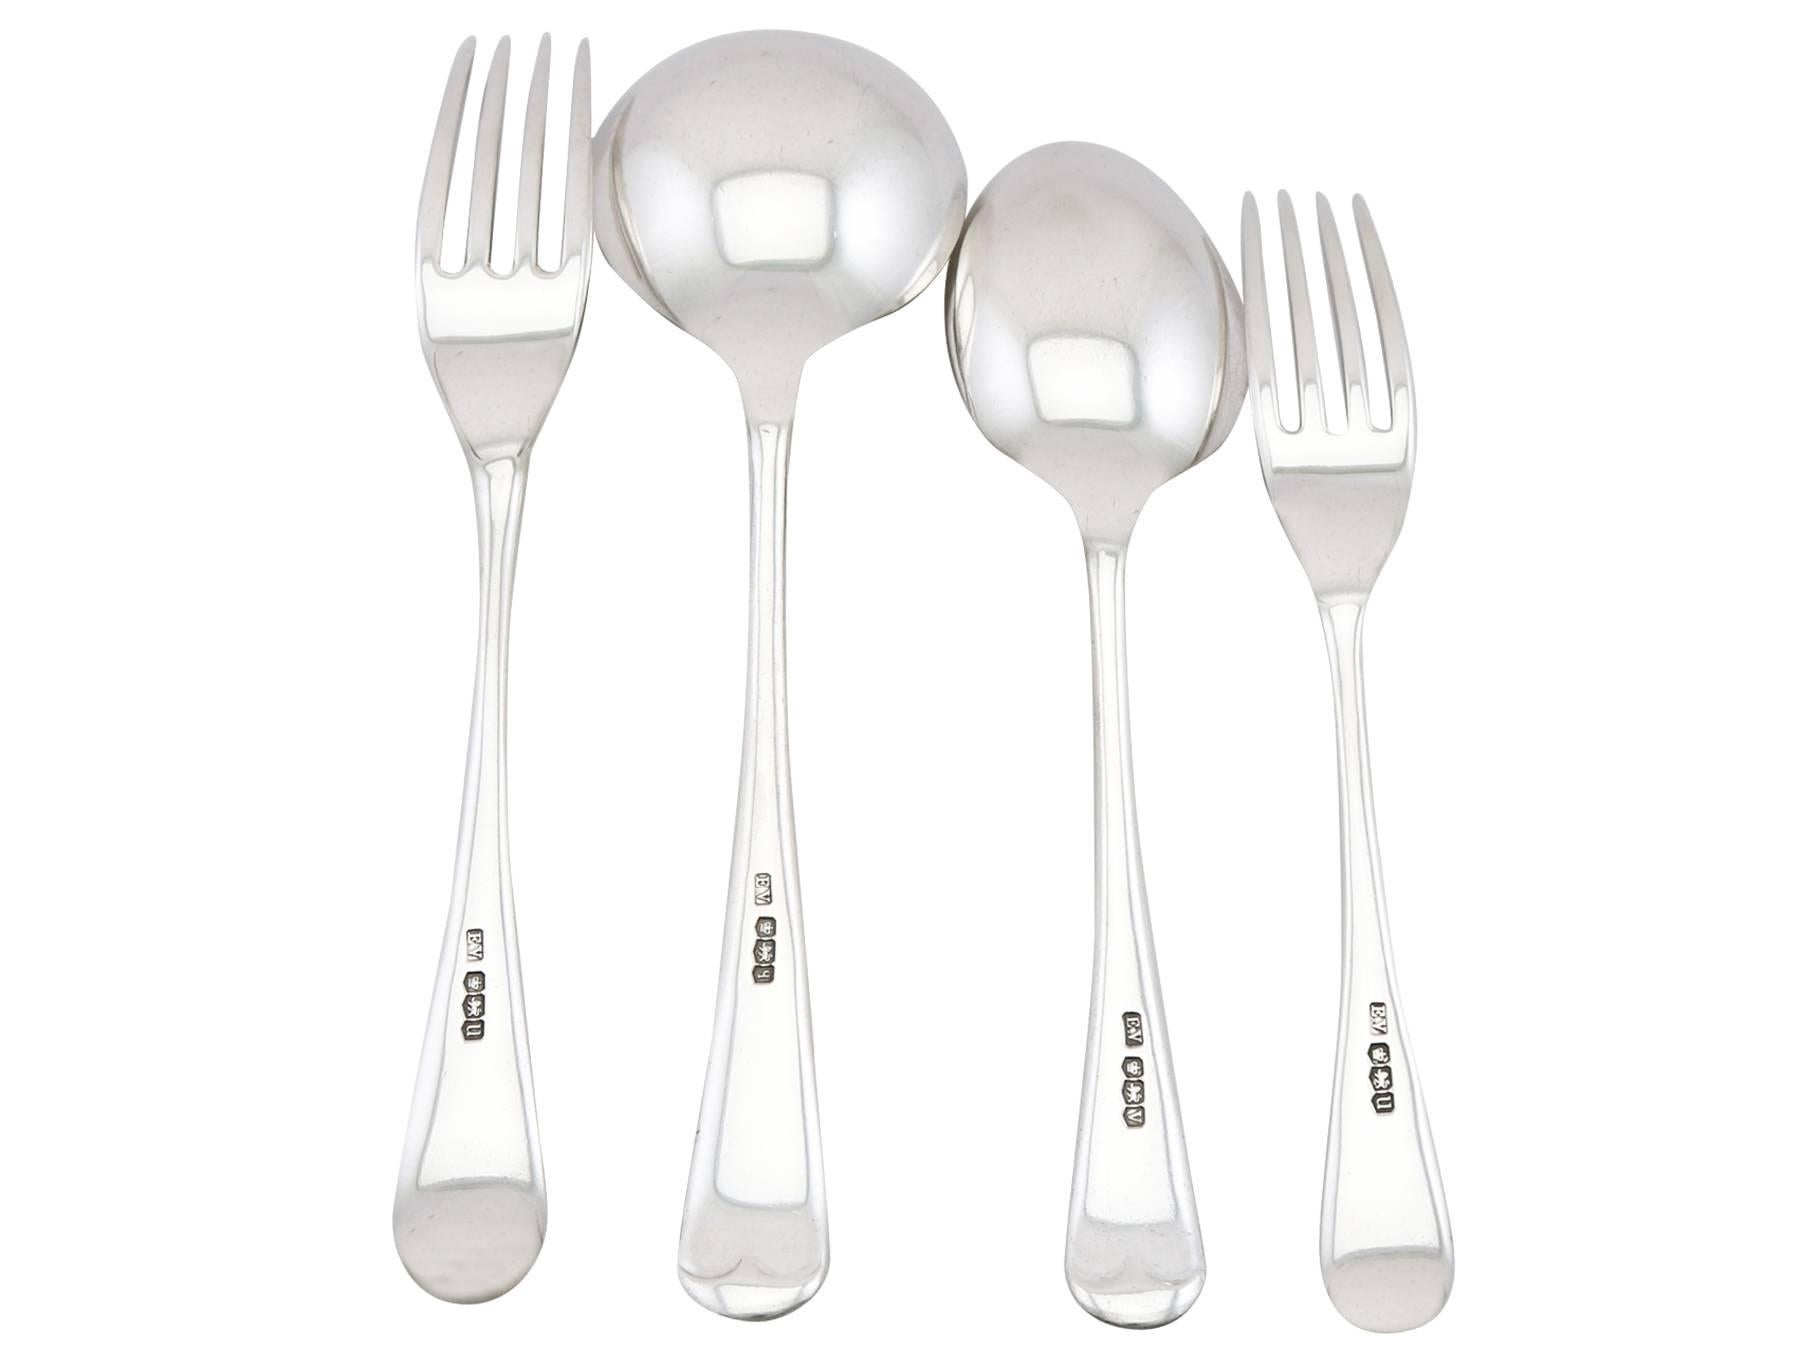 An exceptional, fine and impressive antique English sterling silver straight Old English pattern canteen of cutlery for eight persons; an addition to our antique flatware sets.

The pieces of this exceptional antique sterling silver flatware